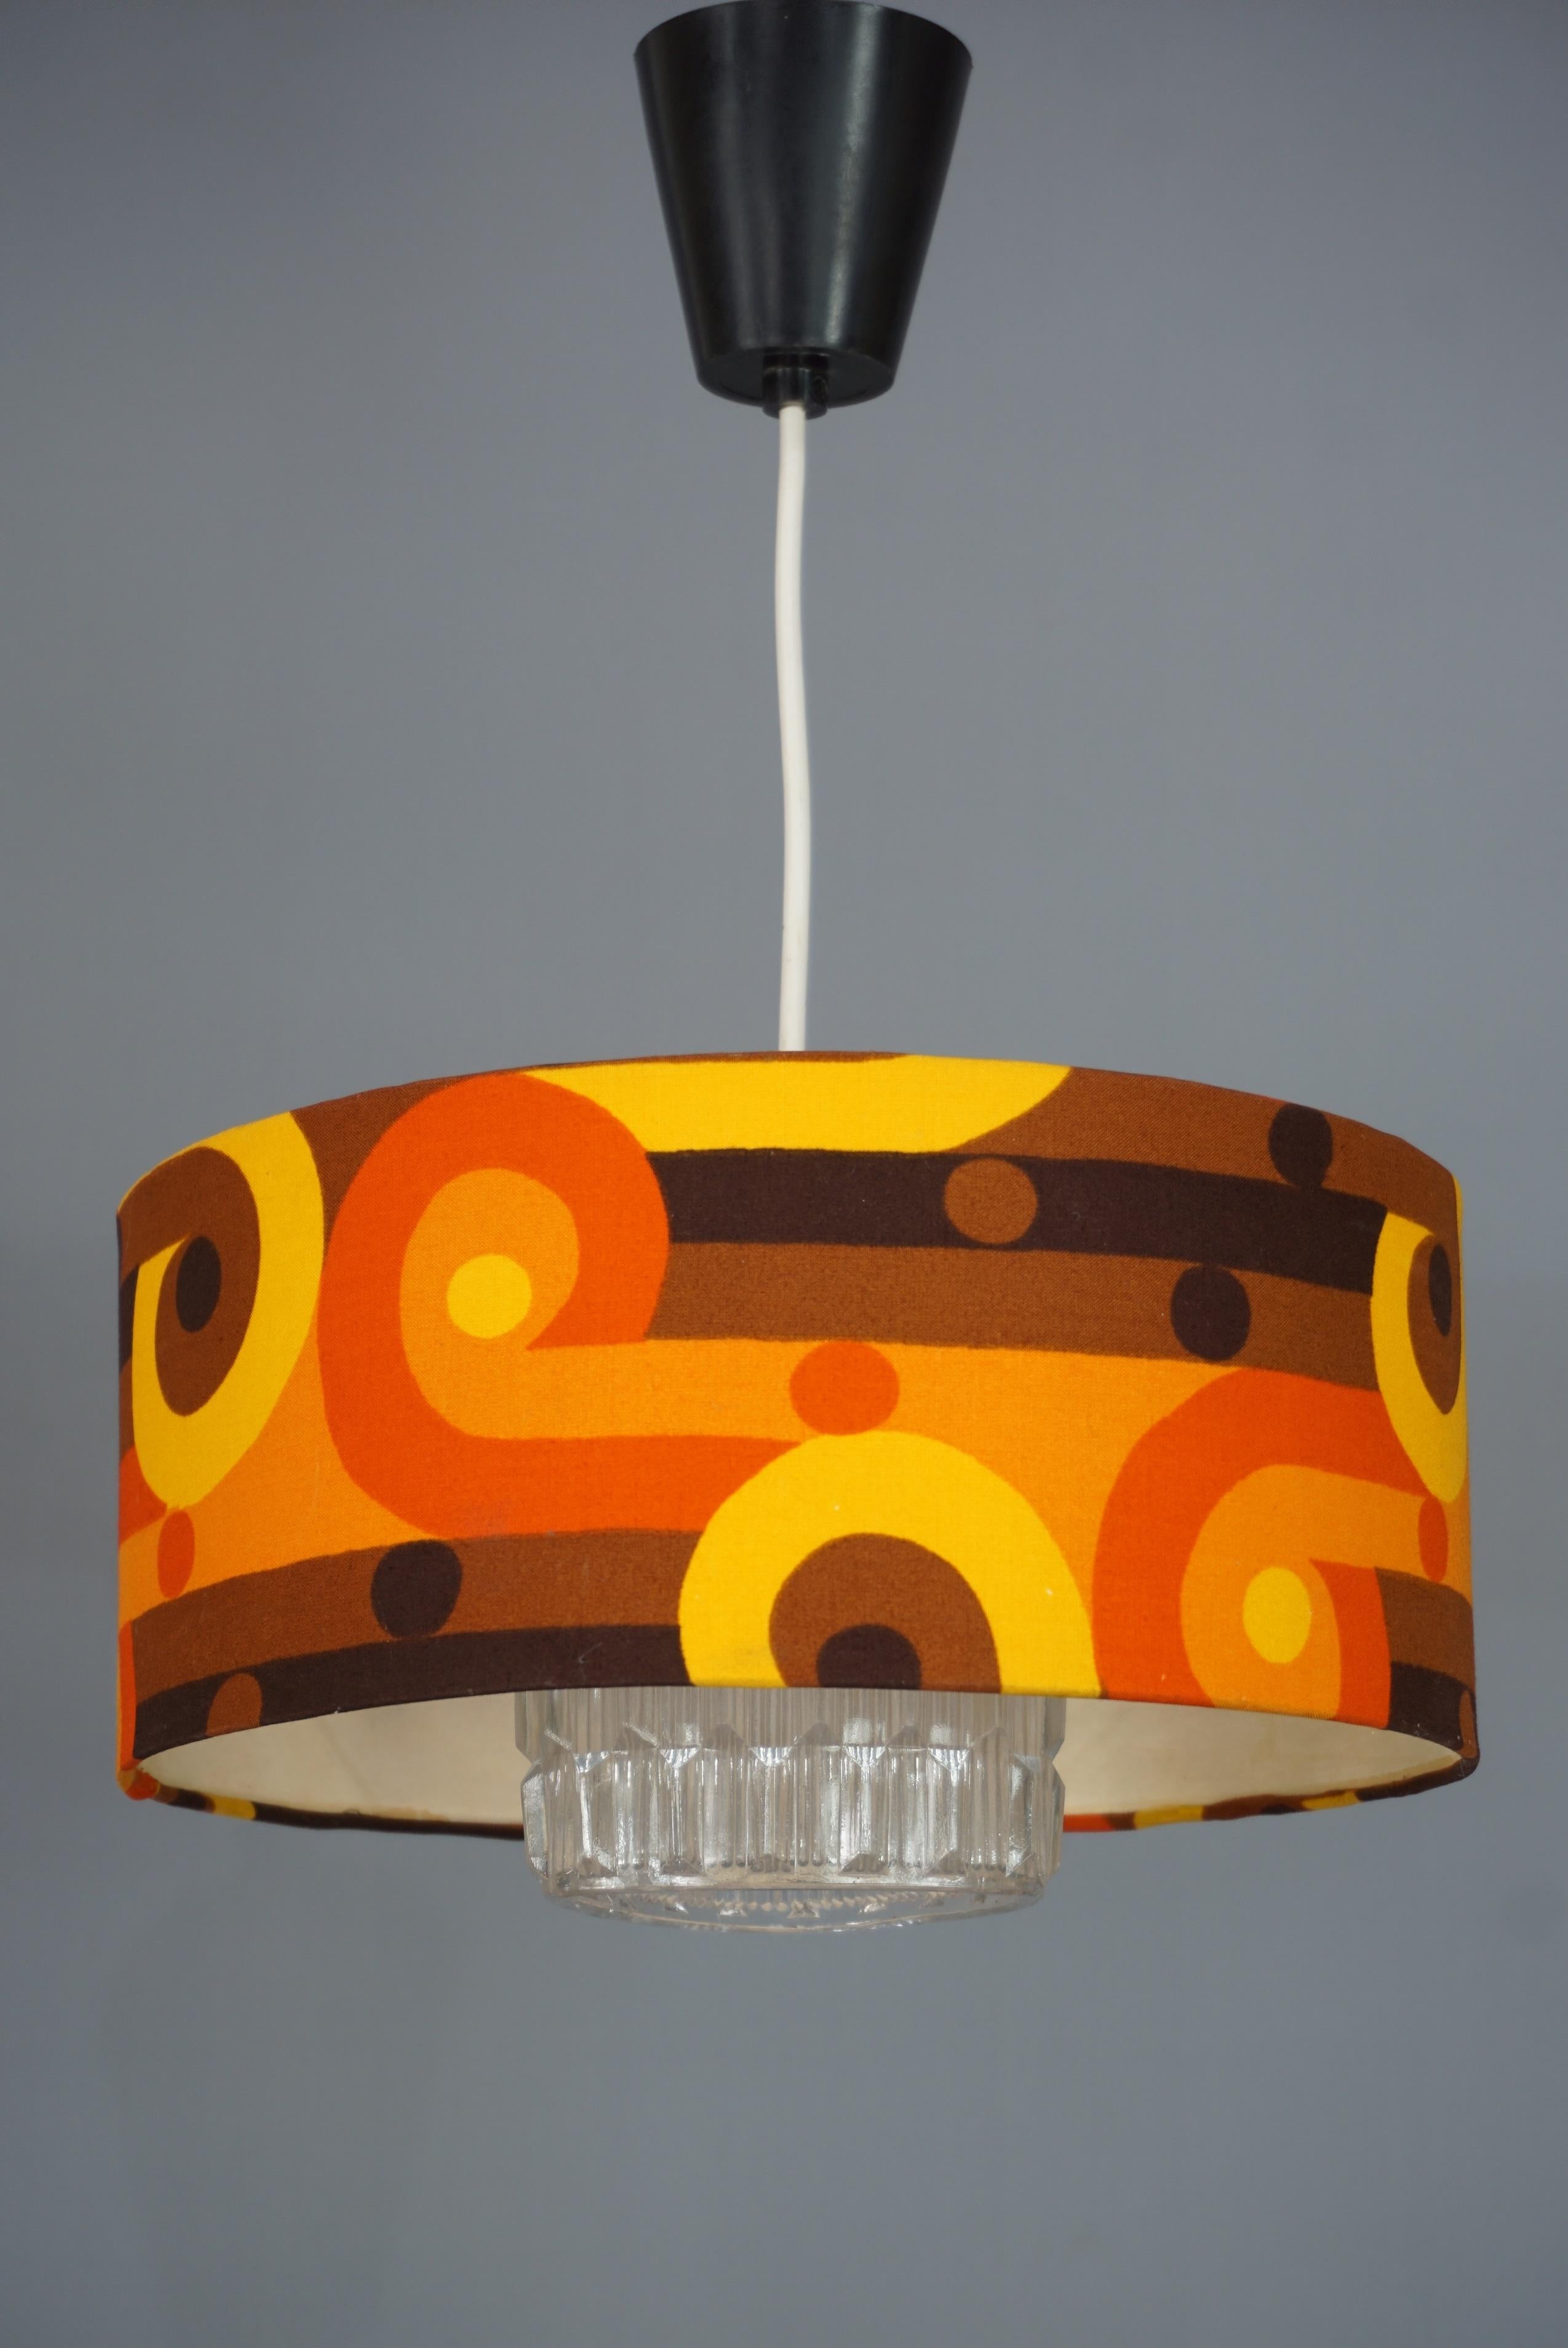 Sculpted glass and psychedelic fabric for this chandelier in total retro and 1970s look.